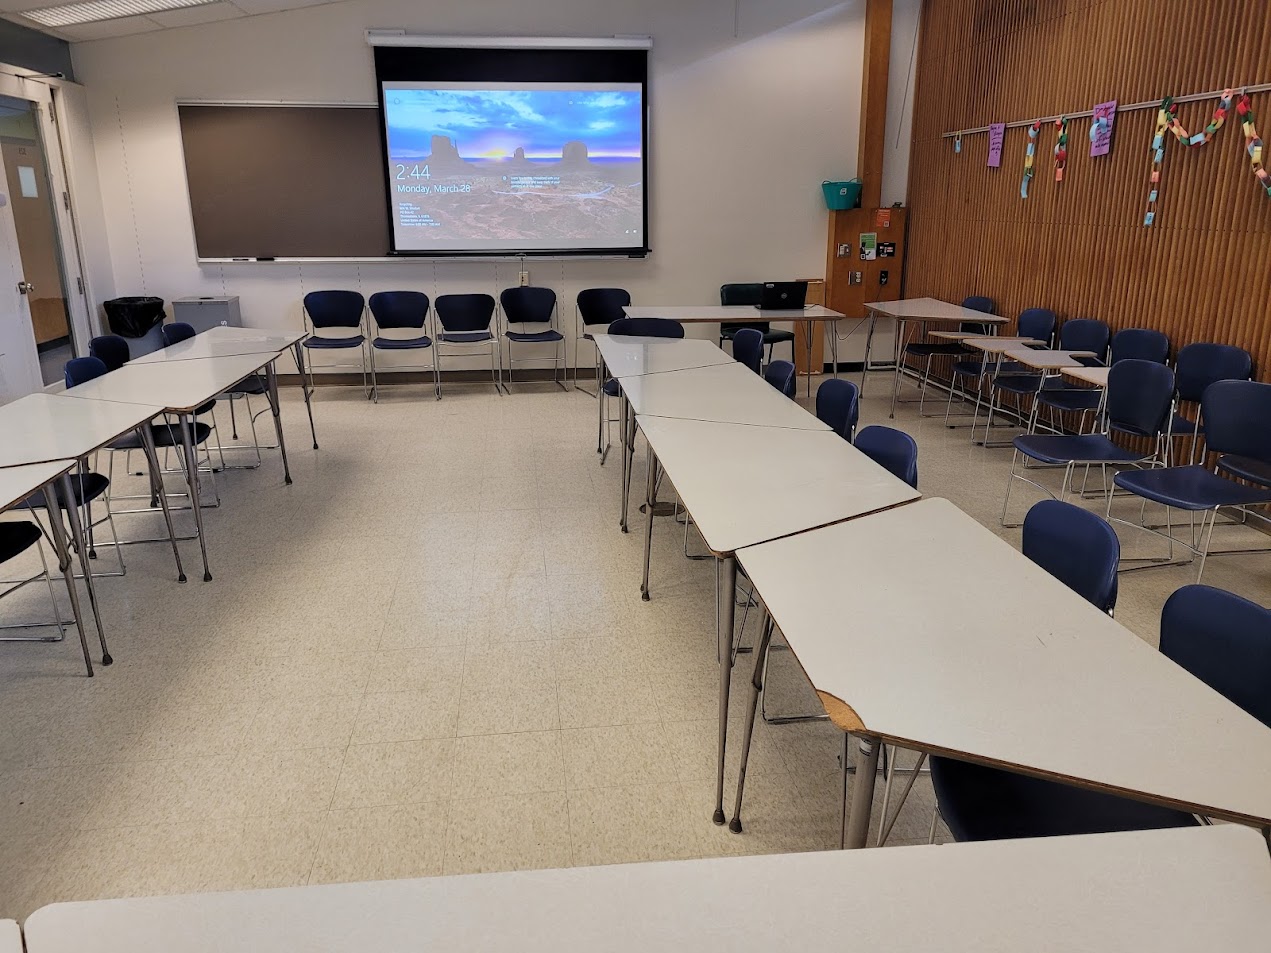 A view of the classroom with moveable tables and chairs, chalkboard, and instructor table in front